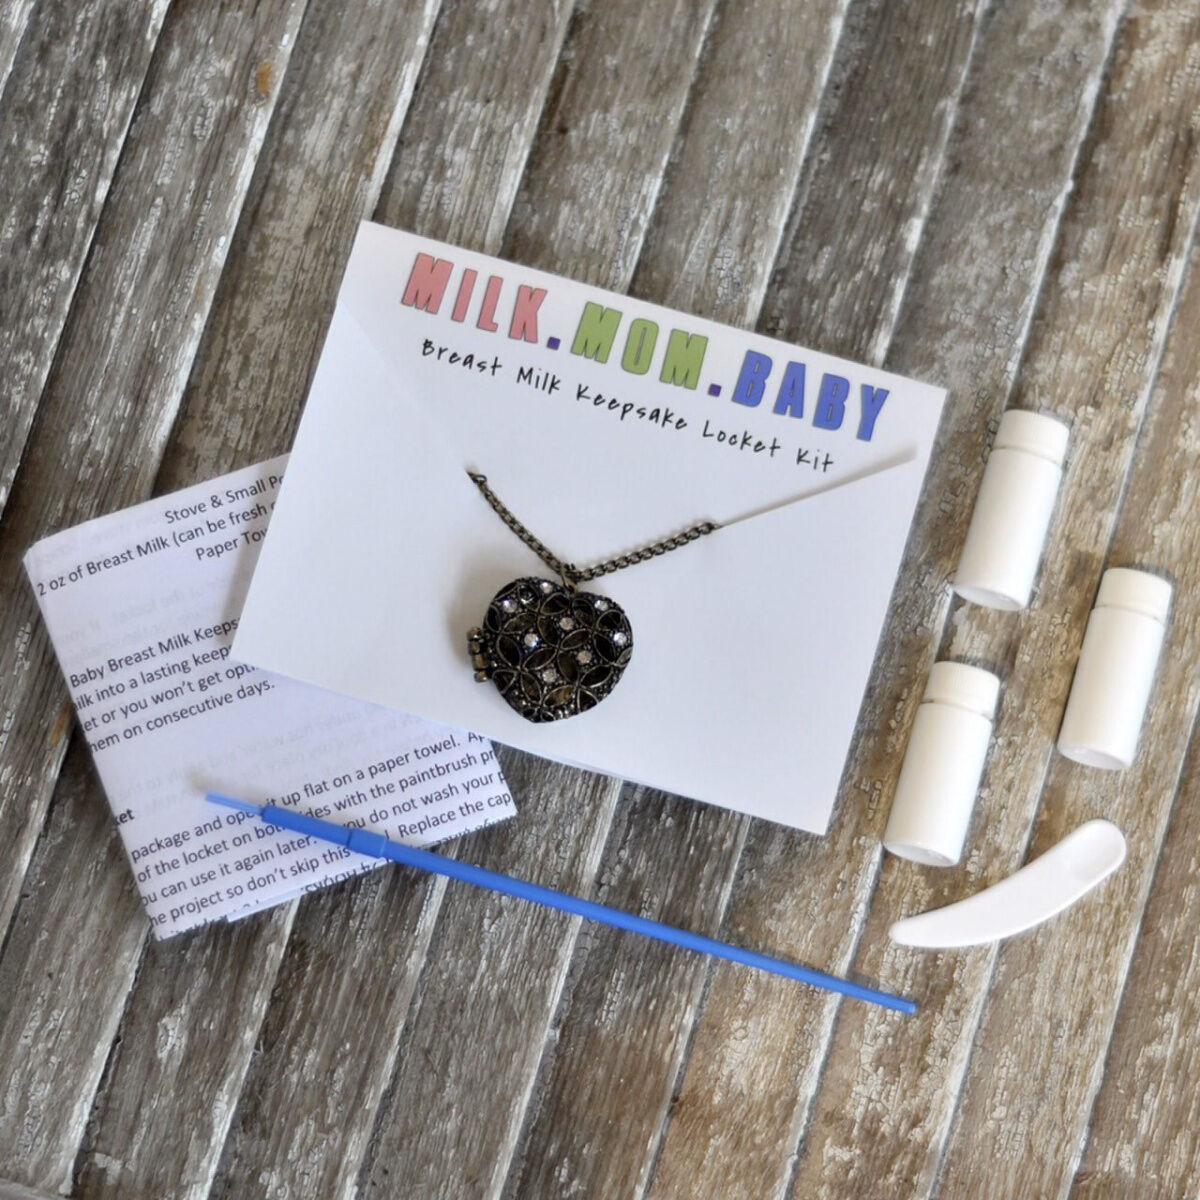 DIY Breast Milk Jewelry: How To Preserve Breast Milk At Home